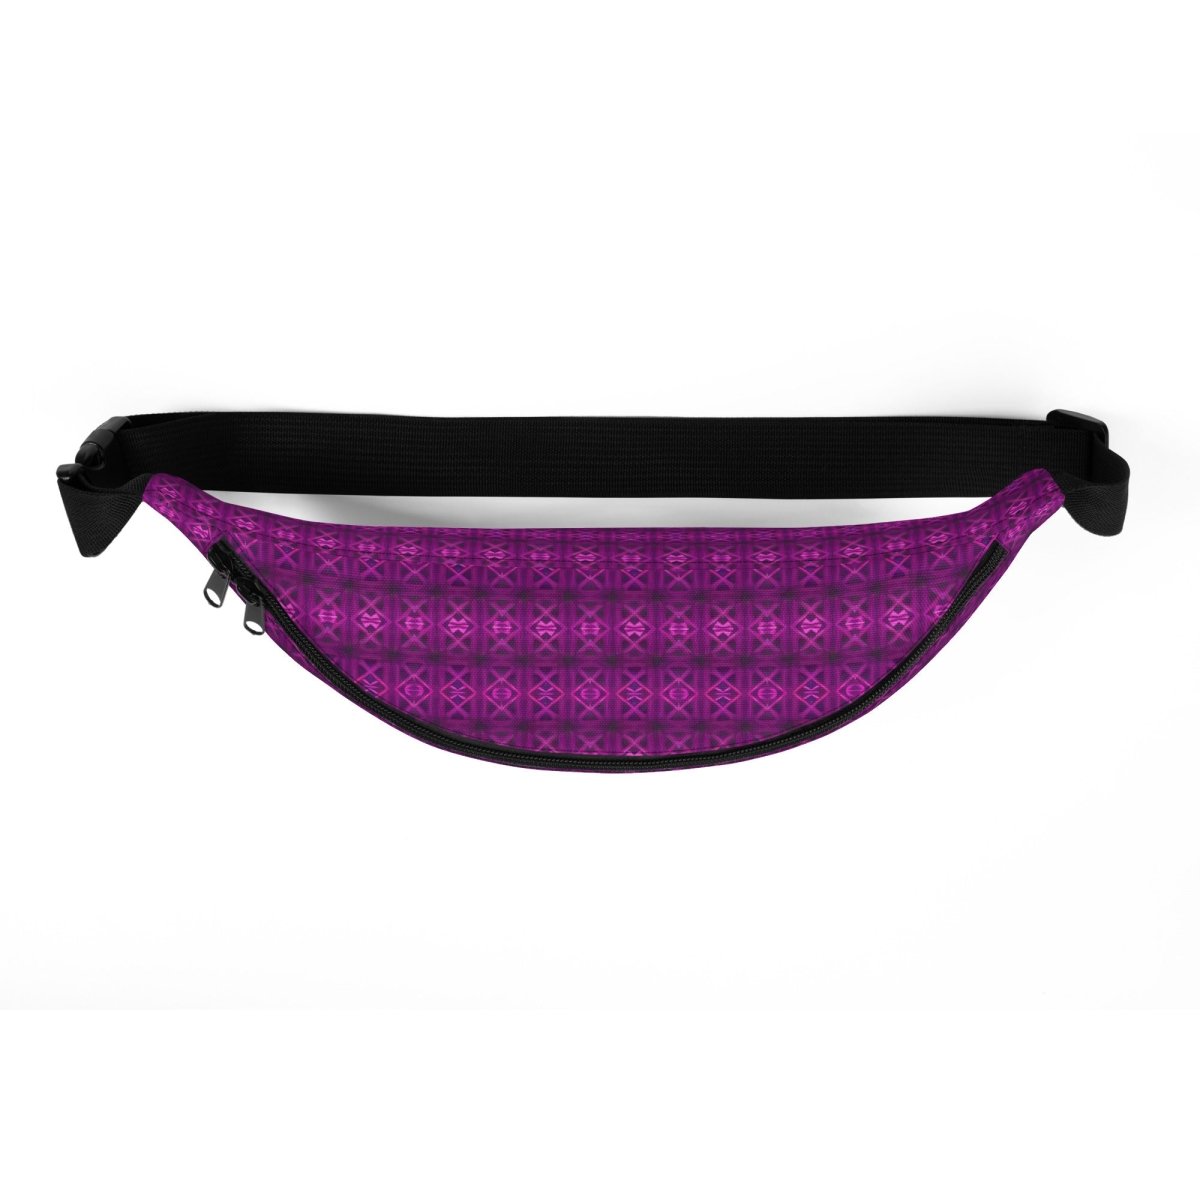 Sefira Summer Festival Fanny Pack | Sefira Beach Collection Accessories - Sefira Collections